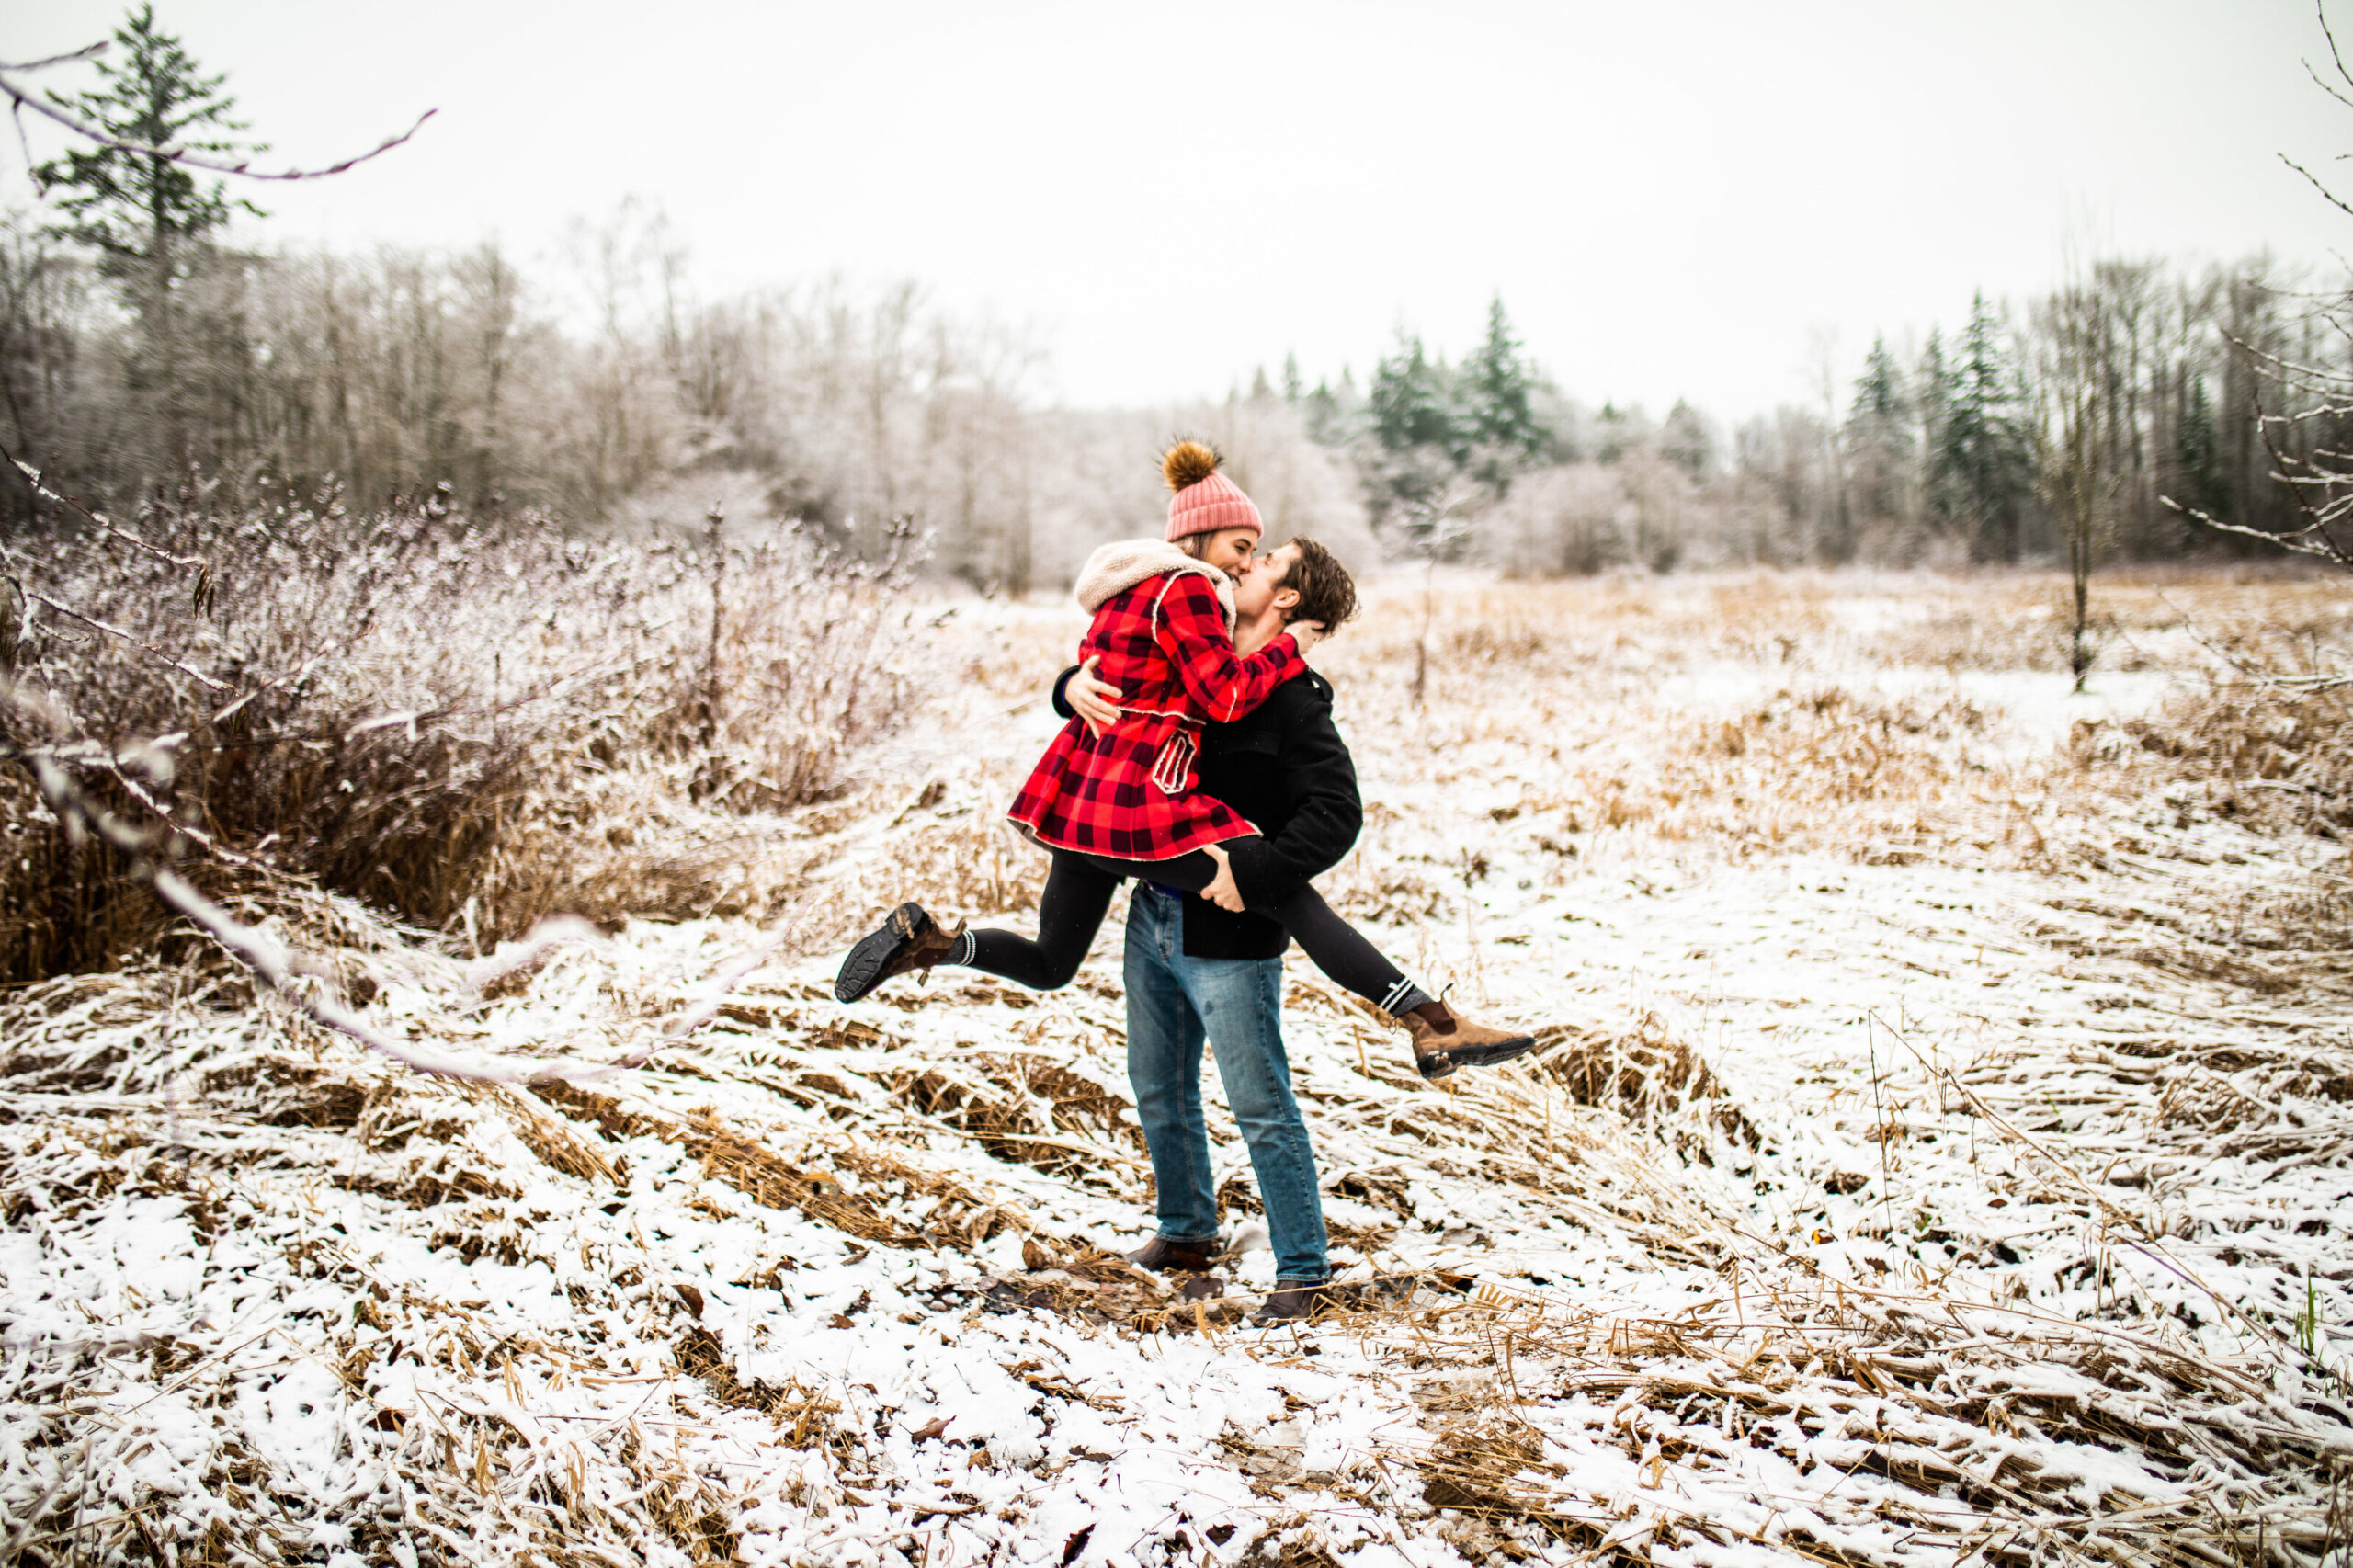 Snow photoshoot for engagements and weddings